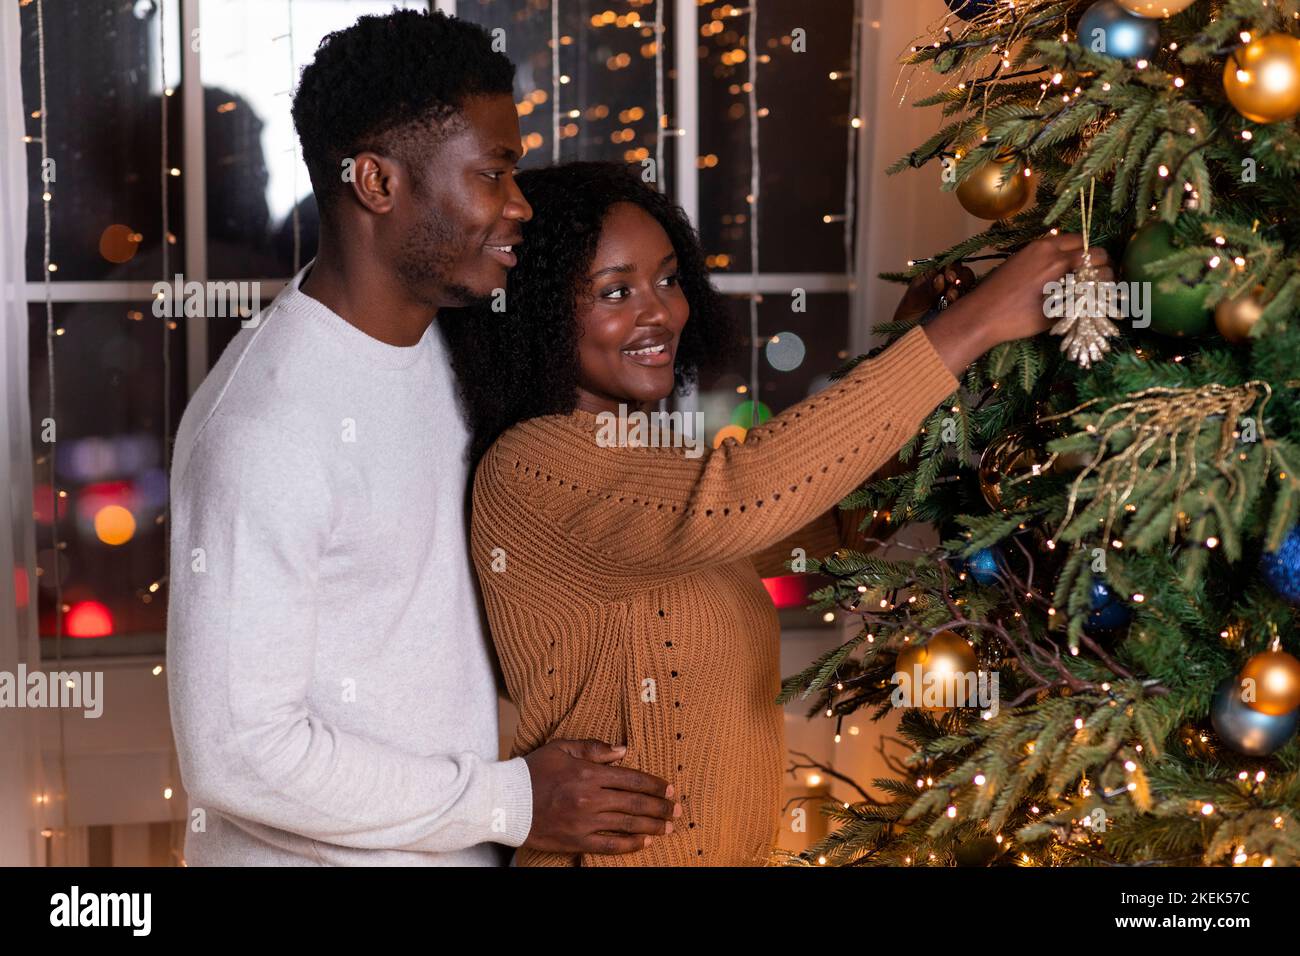 Smiling young african american guy and woman hugs and decorate Christmas tree with toys Stock Photo